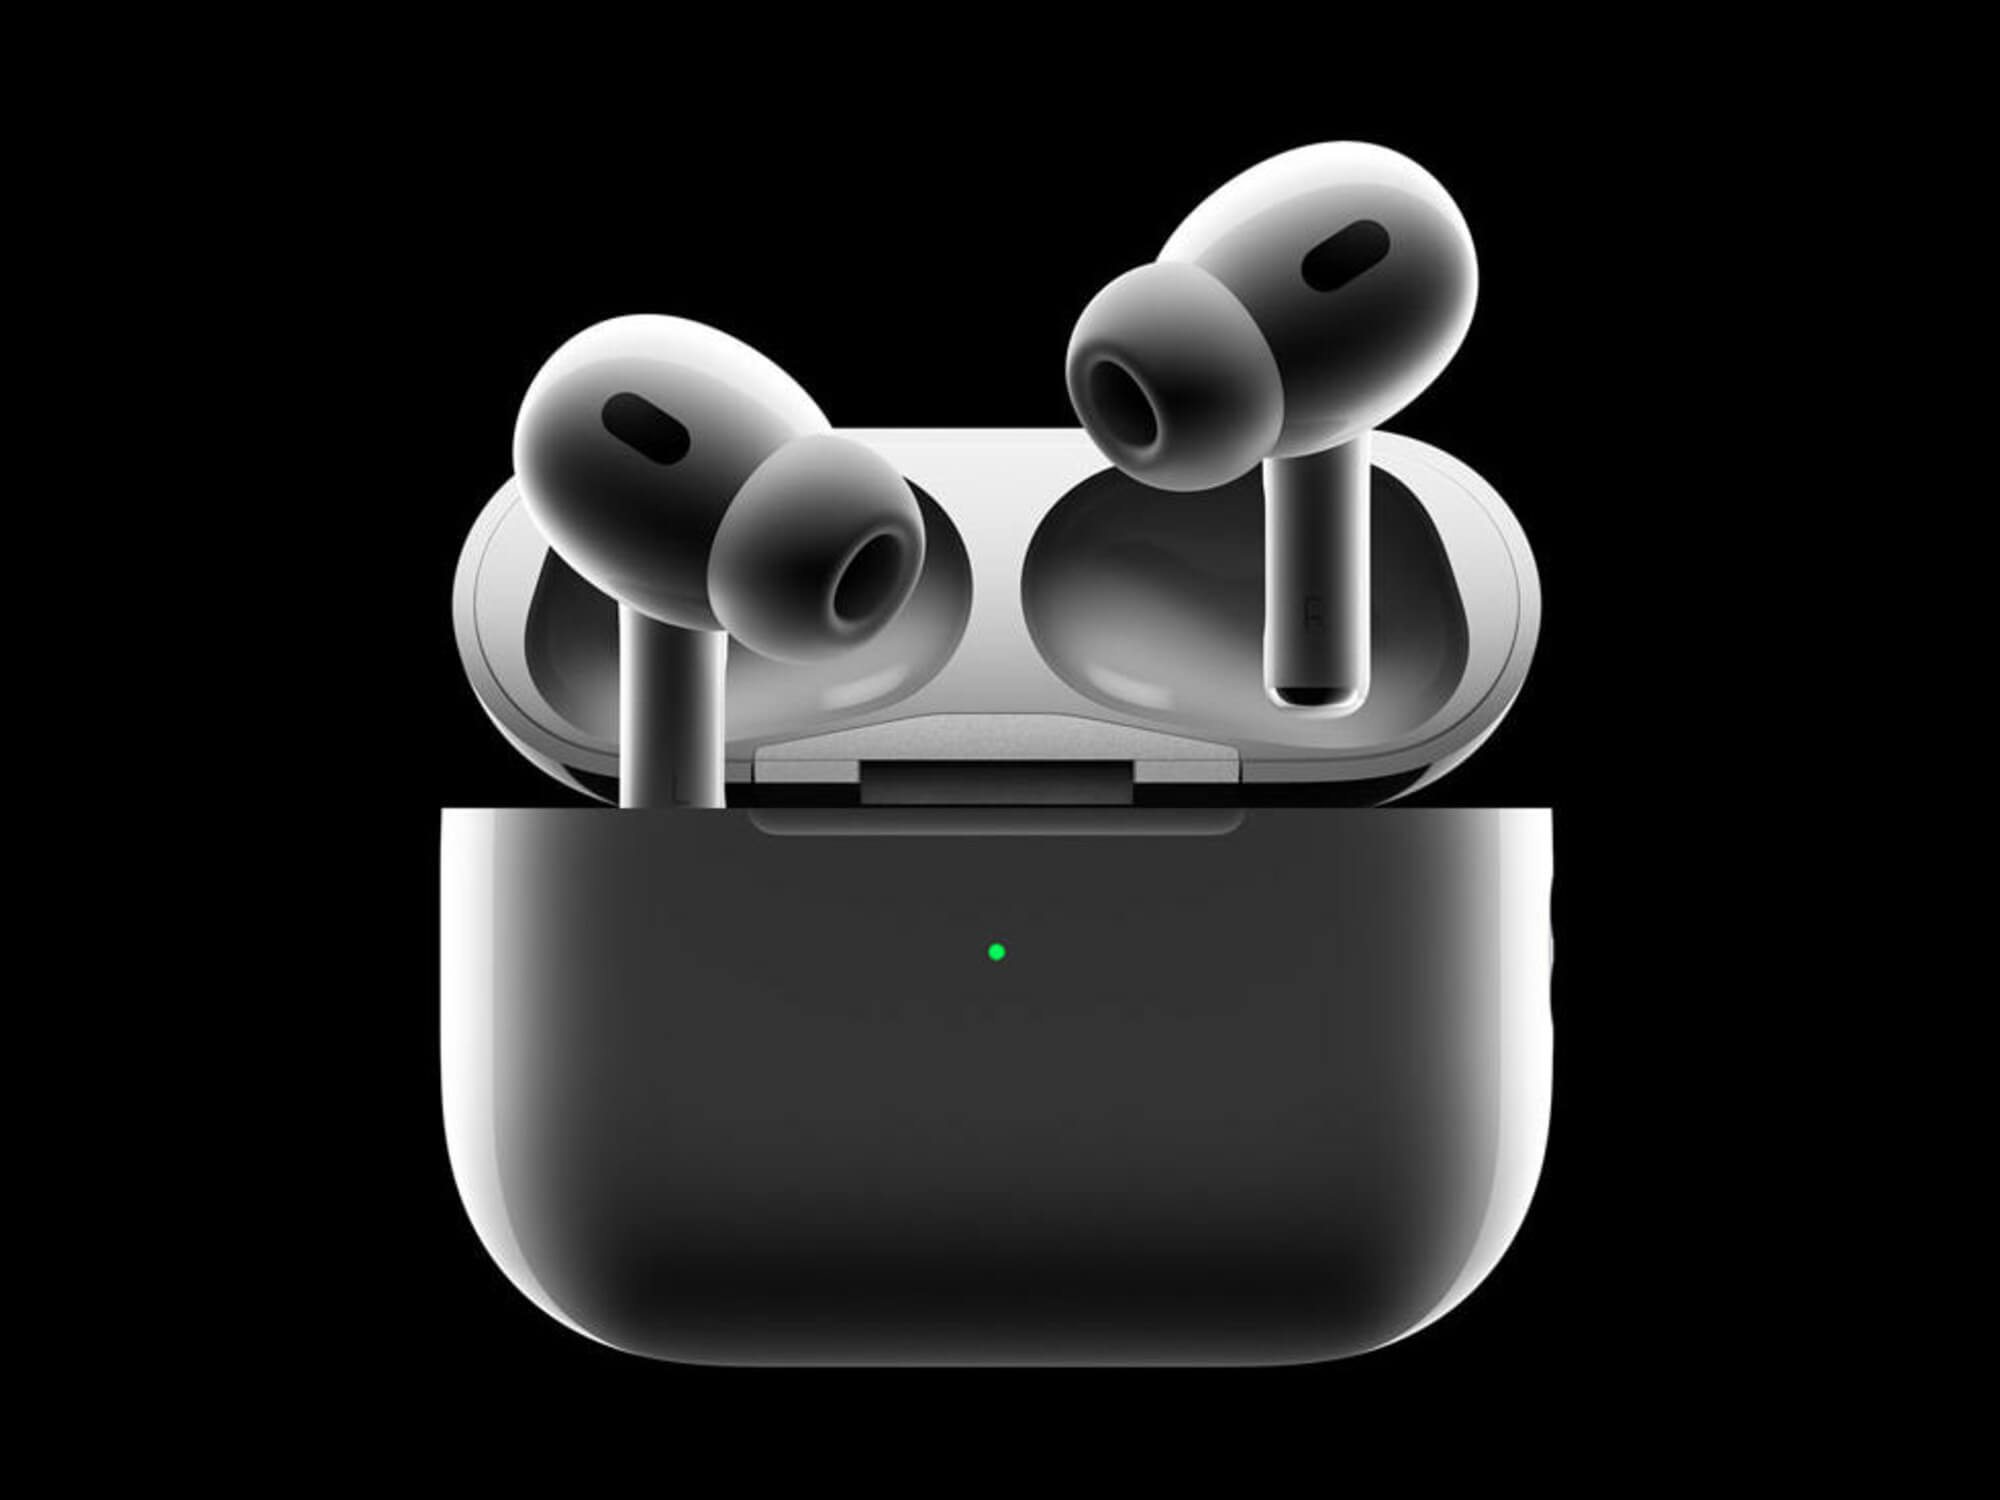 new Airpods has touch but no lossless support